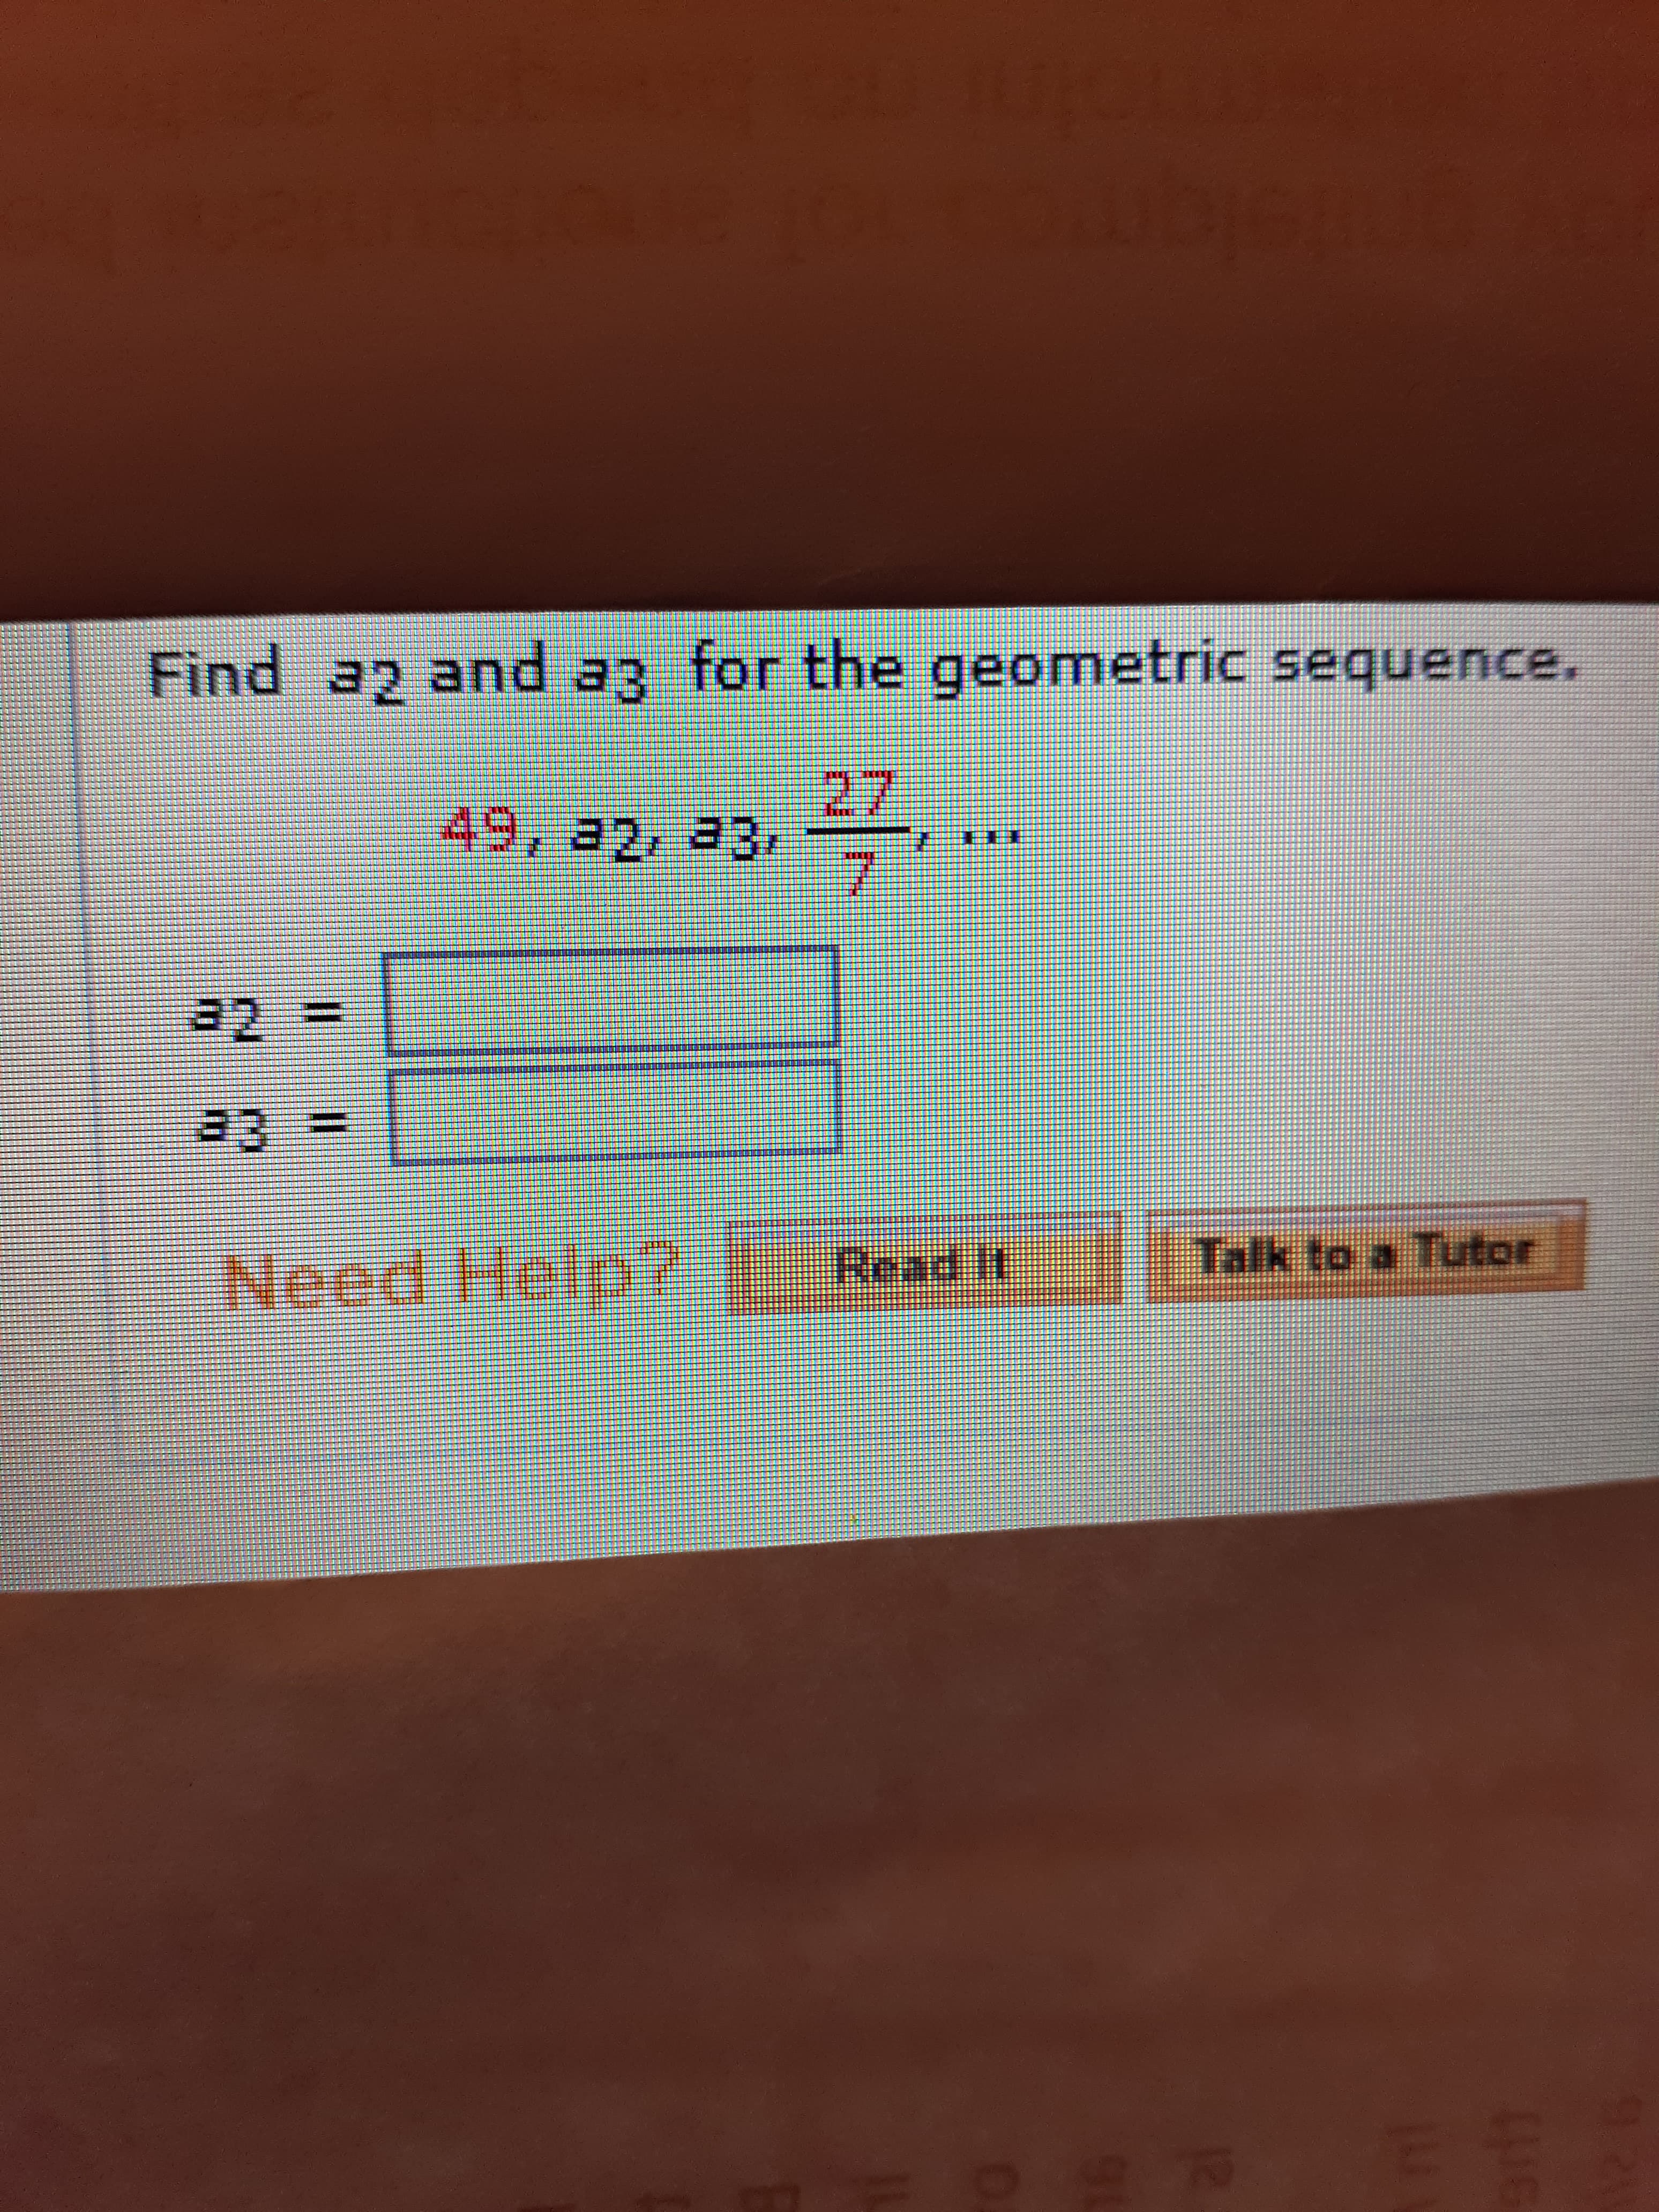 Find a2 and a3 for the geometric sequence.
27
49, a2, a3,
7.
33%3D
Talk to a Tutor
Noed Help?
Read It
%3D
